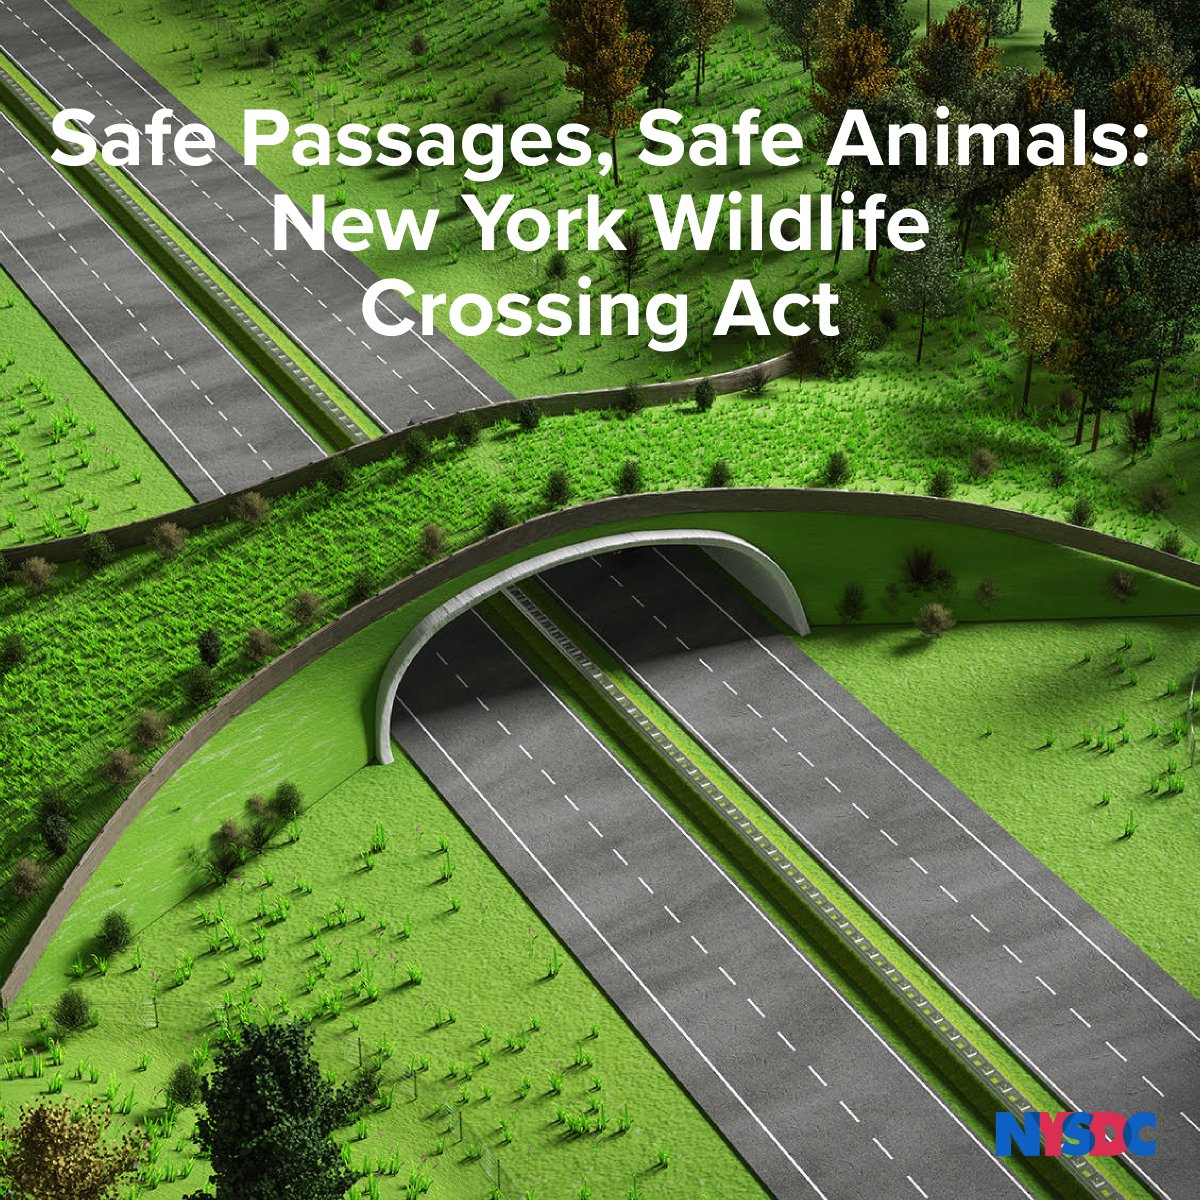 'My Wildlife Crossings bill would draw down $350 million in federal funding from the Infrastructure and Jobs Act to explore the potential for future wildlife crossings in New York to prevent countless injuries and wildlife deaths as well as millions in damage' - @LeroyComrie